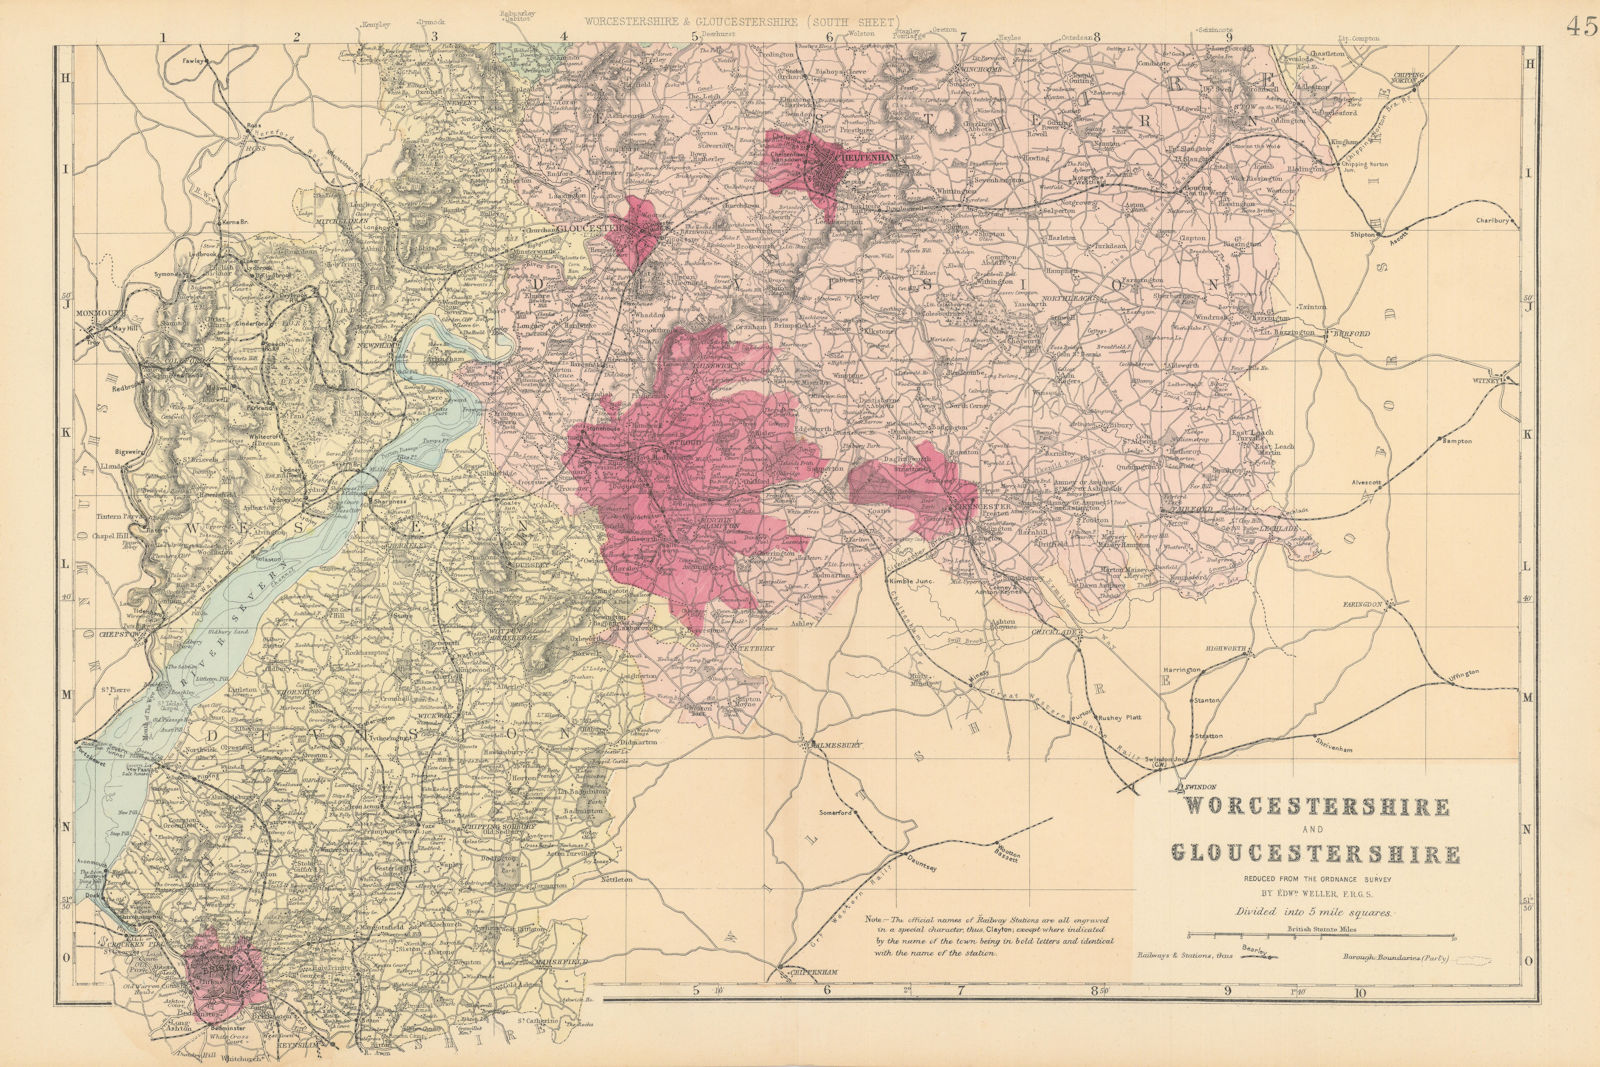 WORCESTERSHIRE & GLOUCESTERSHIRE (South). Antique county map by GW BACON 1884